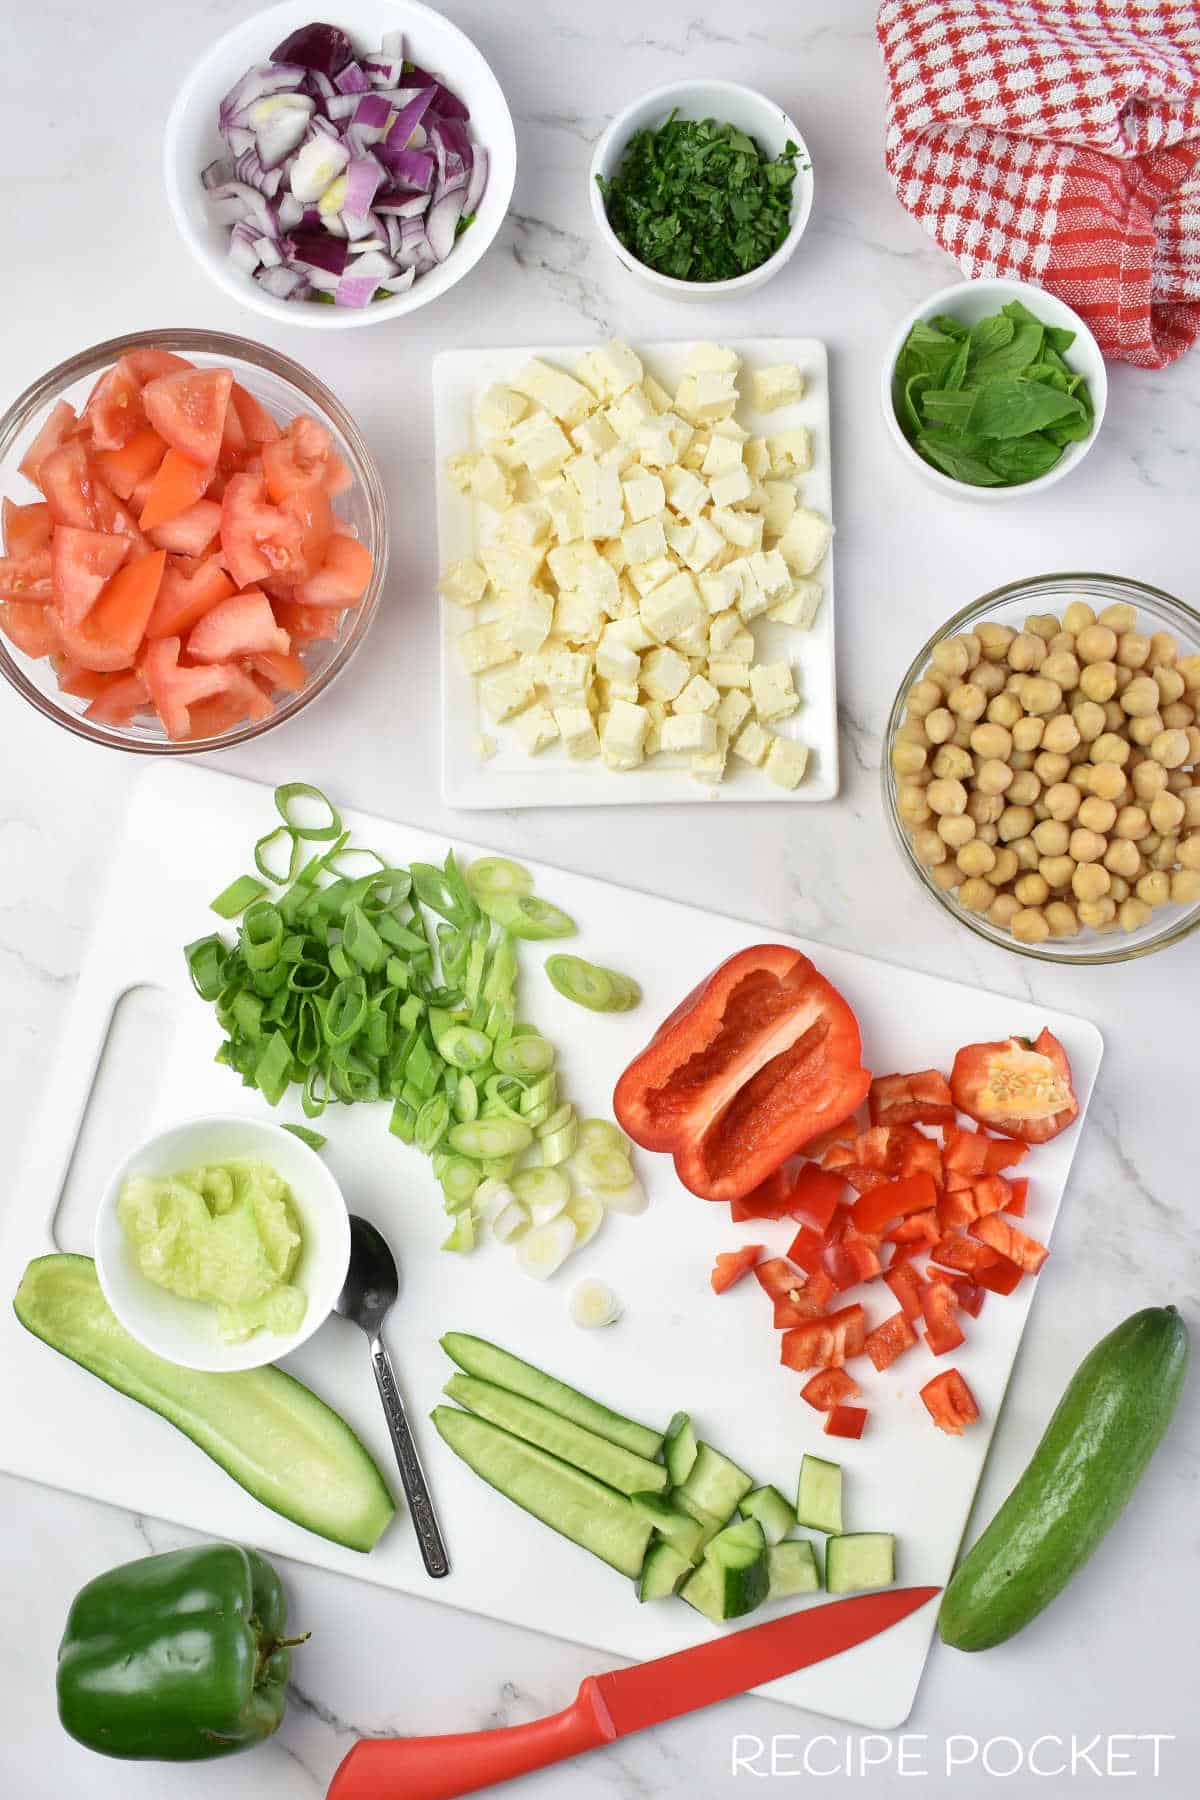 Images showing chopped veggies on a white cutting board.